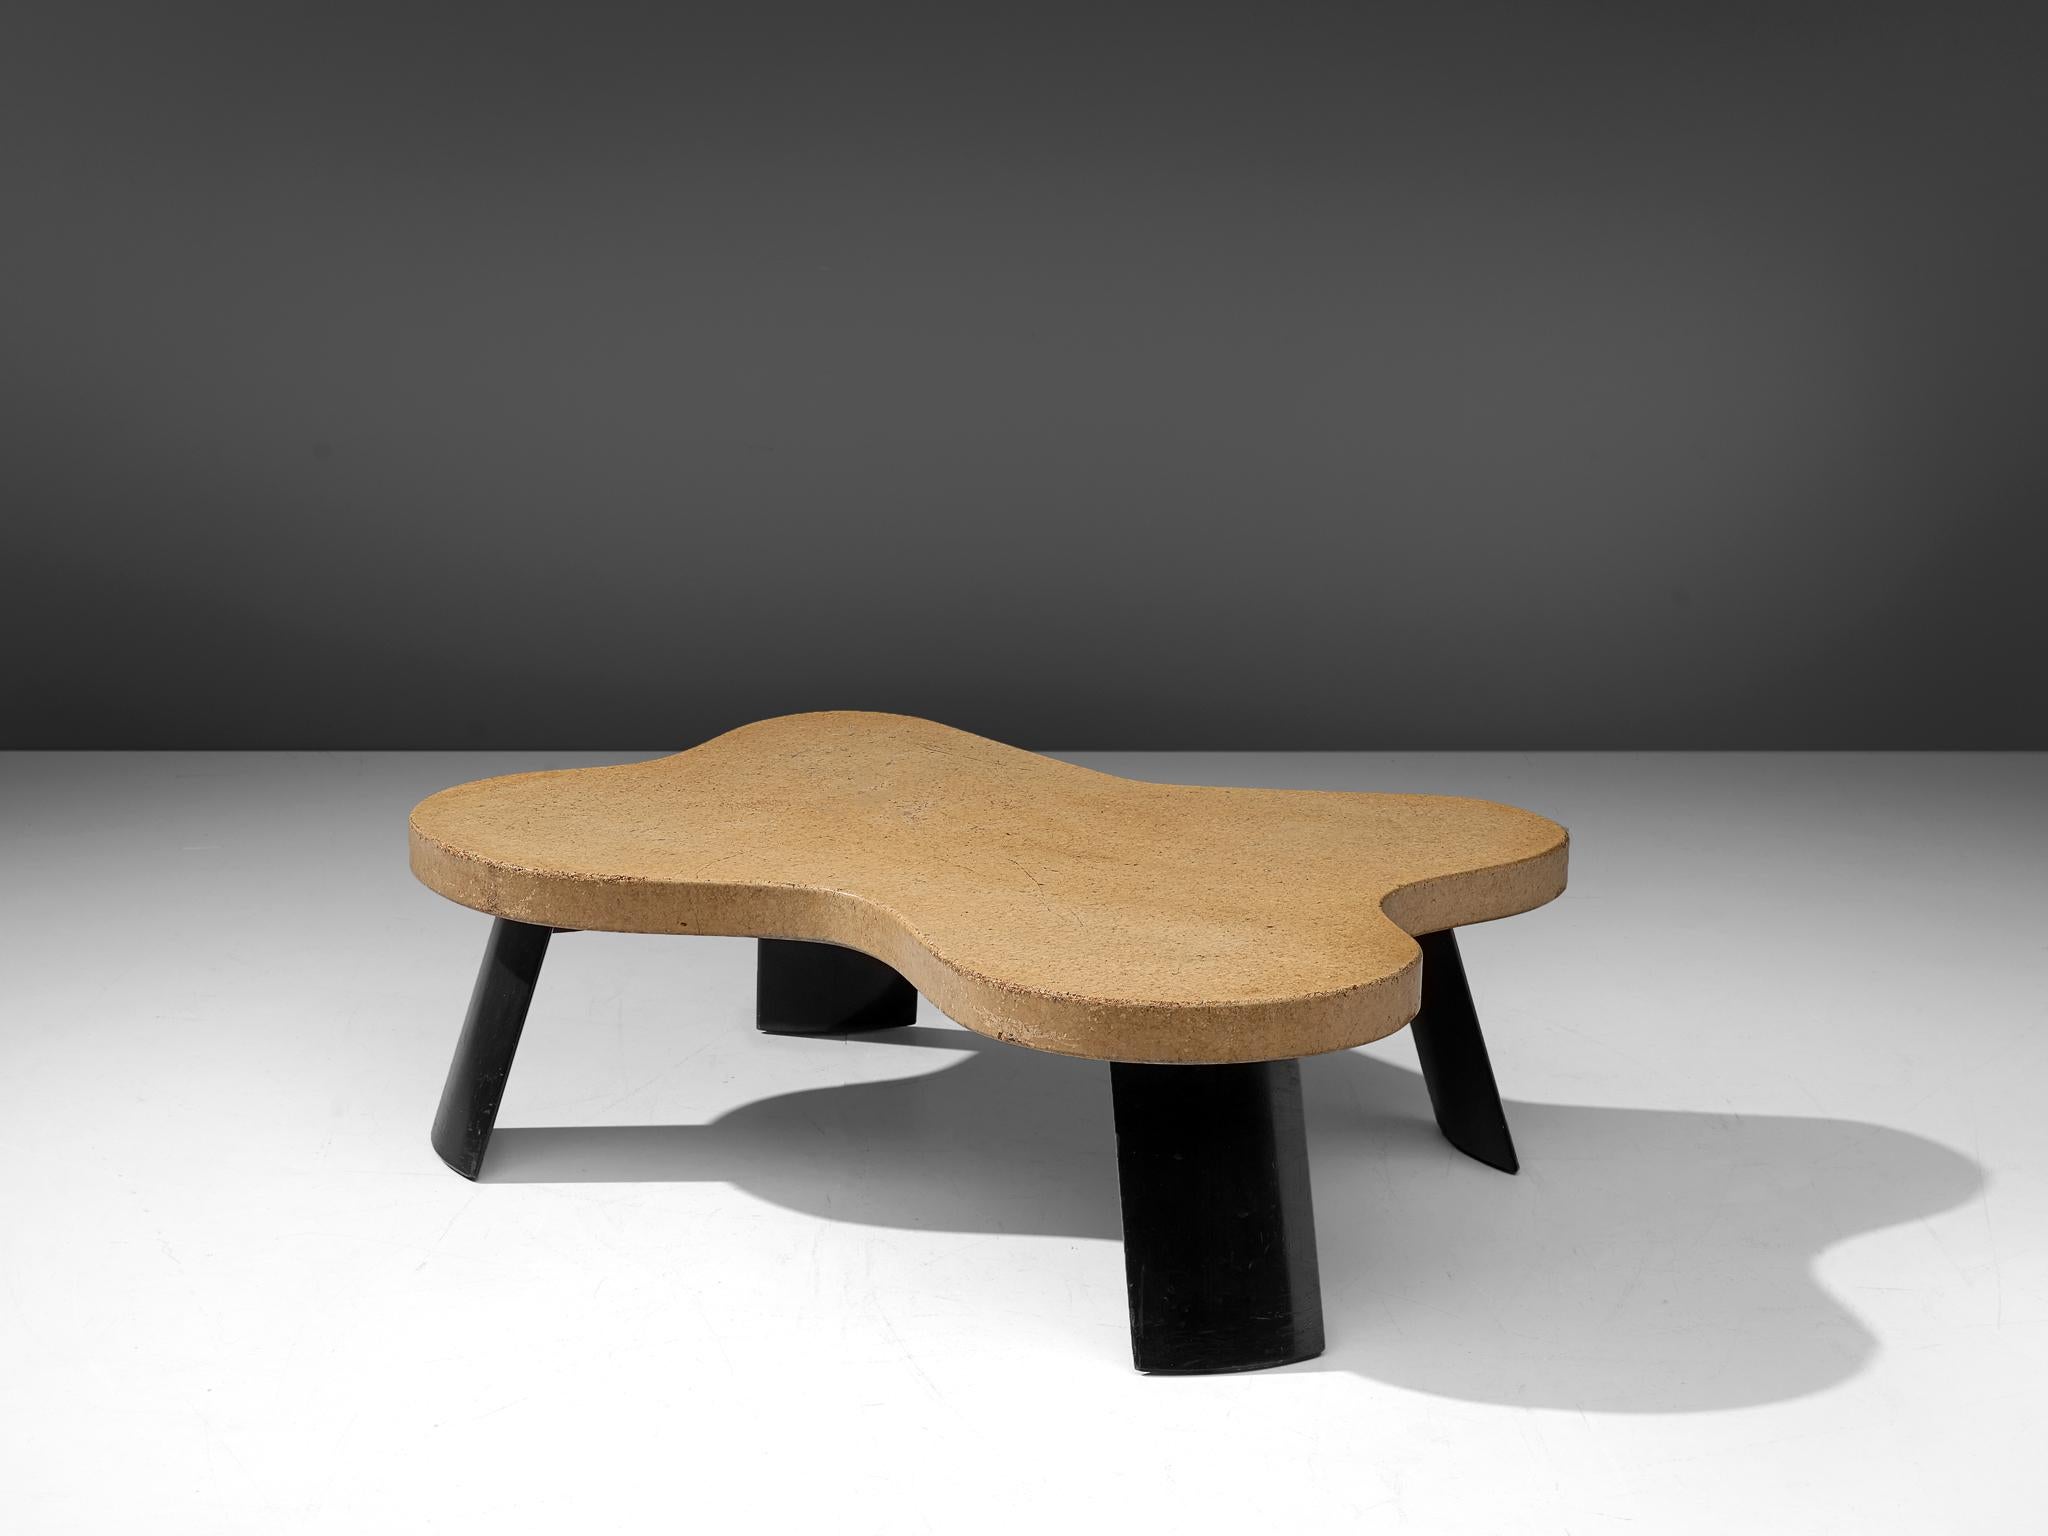 Paul T. Frankl for Johnson Furniture Company, cocktail table model no. 5005, bleached cork and mahogany, United States, circa 1951.

A freeform coffee table executed with a bleached cork tale top and mahogany legs that are slightly curved. In 1949